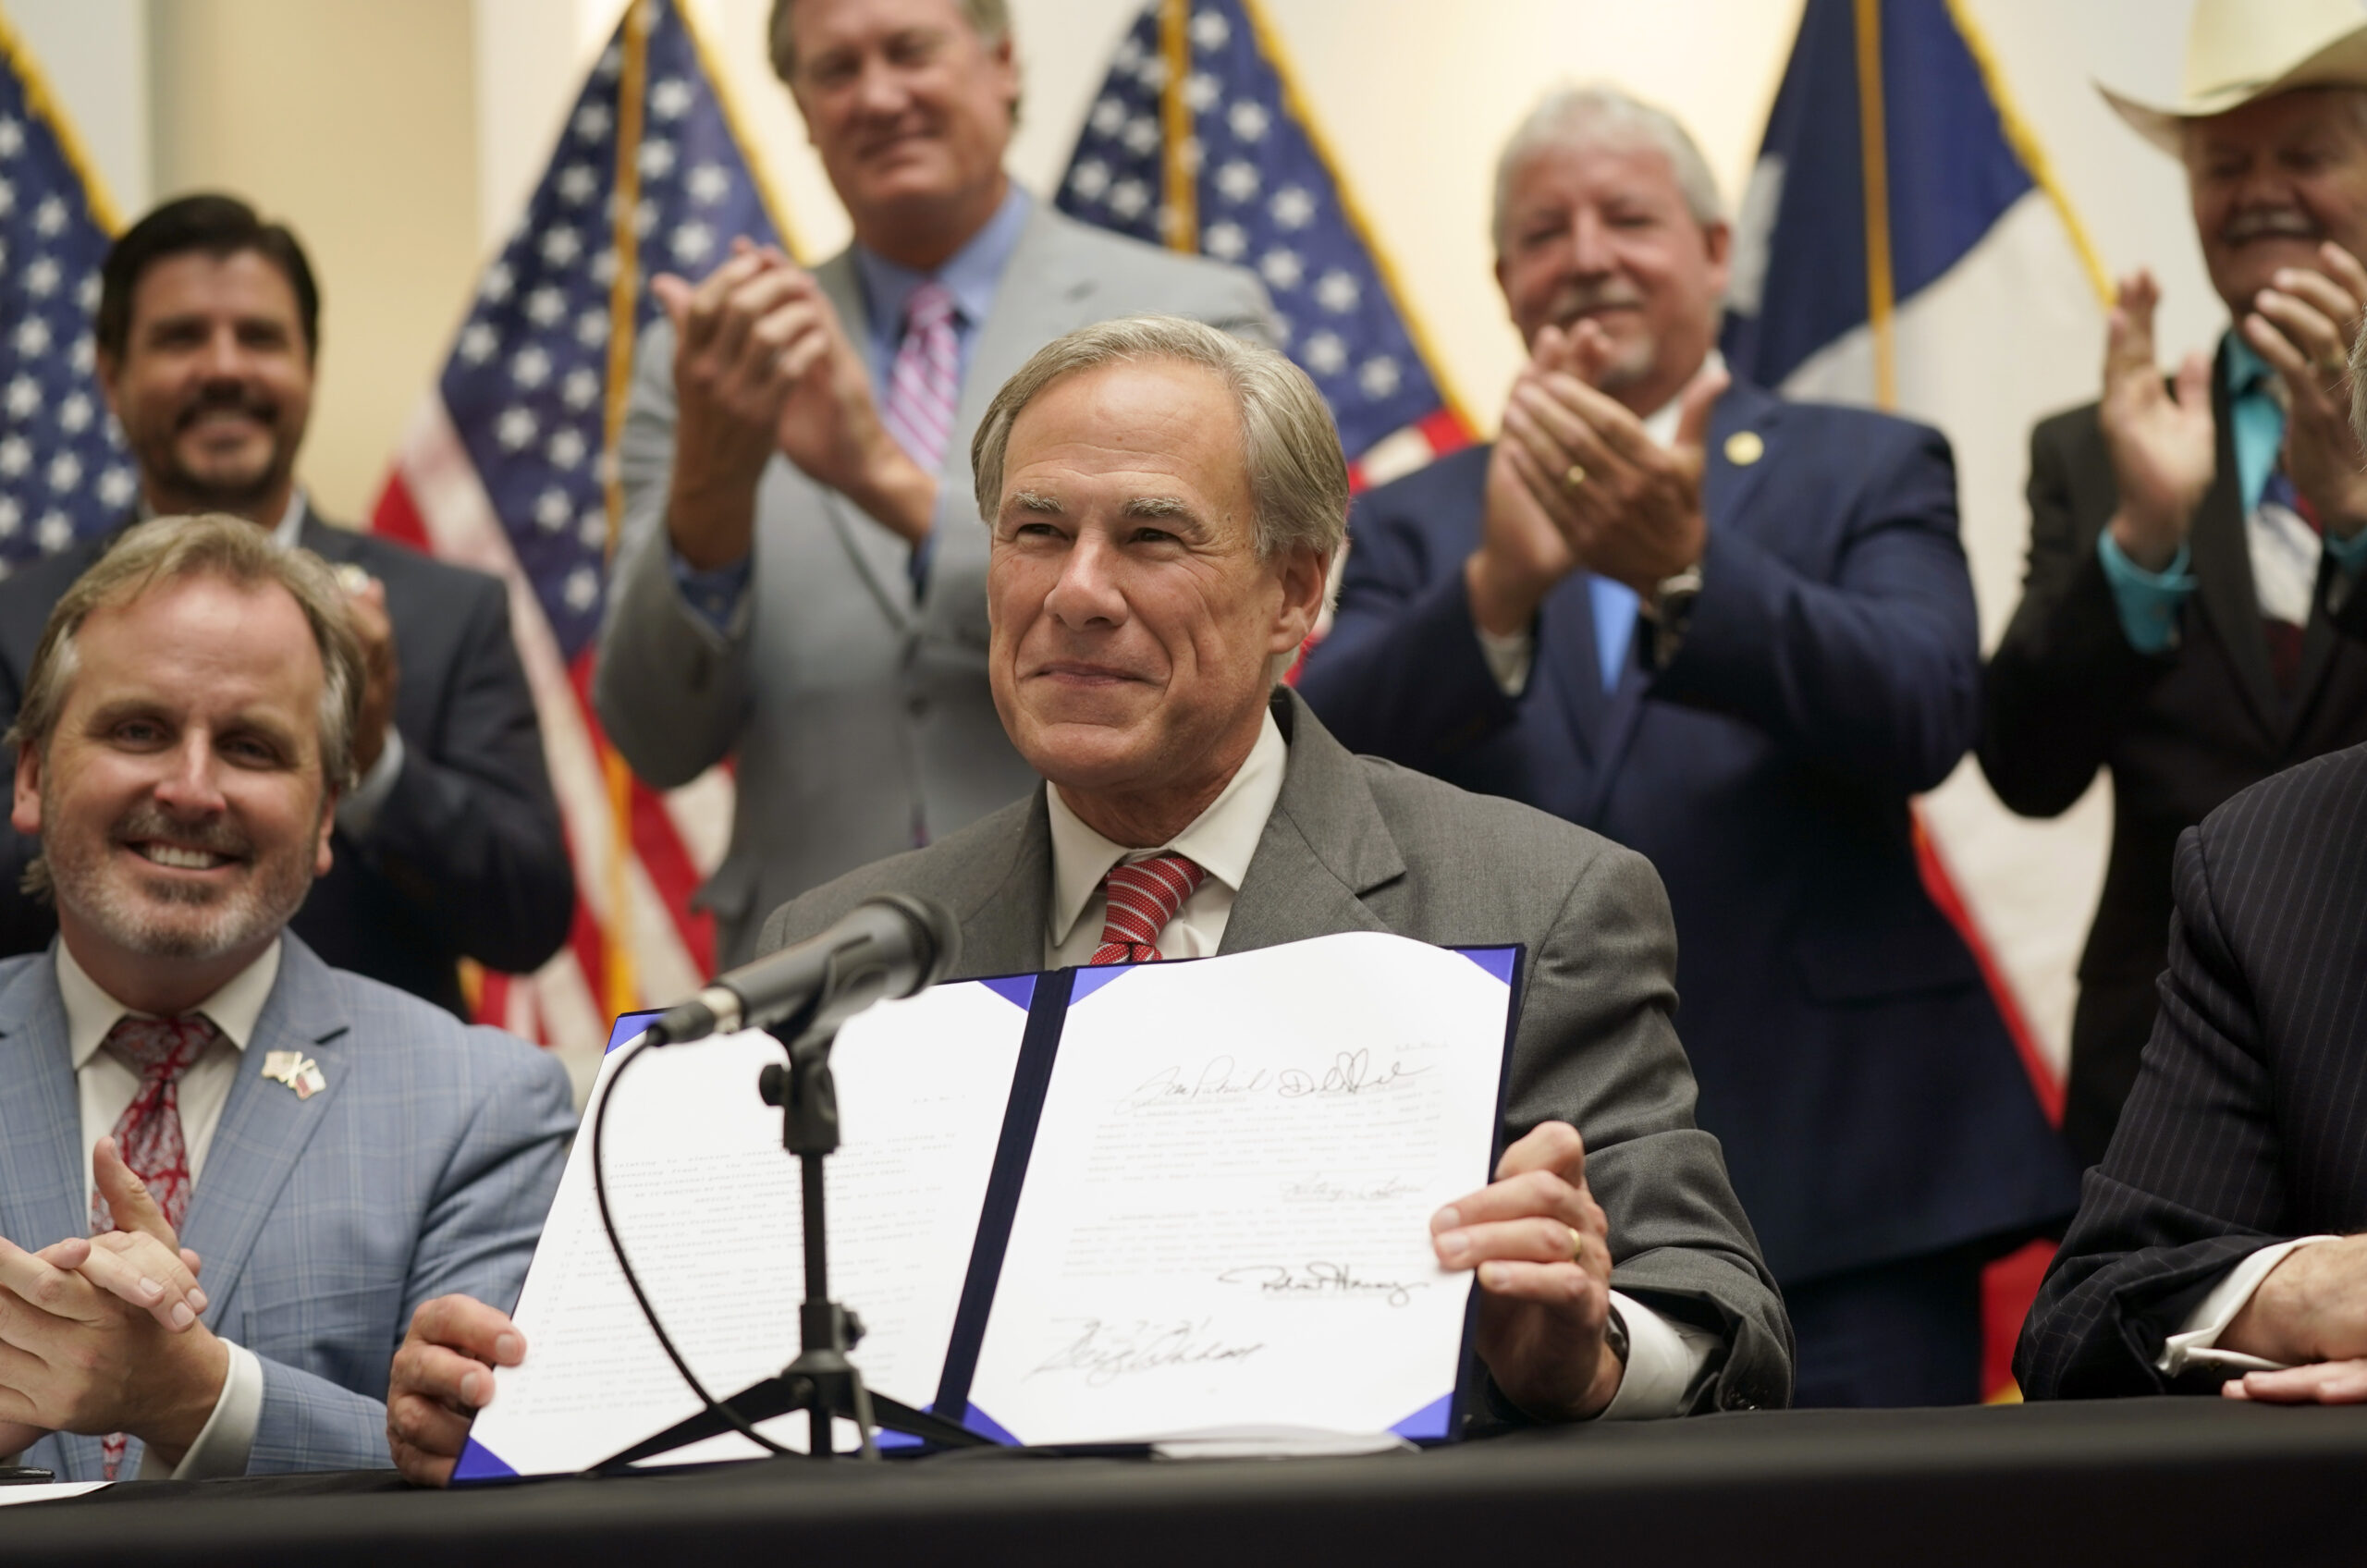 Texas Gov Greg Abbott shows off Senate Bill 1, also known as the election integrity bill, after he signed it into law in Tyler, Texas, Tuesday, Sept. 7, 2021. The sweeping bill signed Tuesday by the two-term Republican governor further tightens Texas’ strict voting laws. (AP Photo/LM Otero)